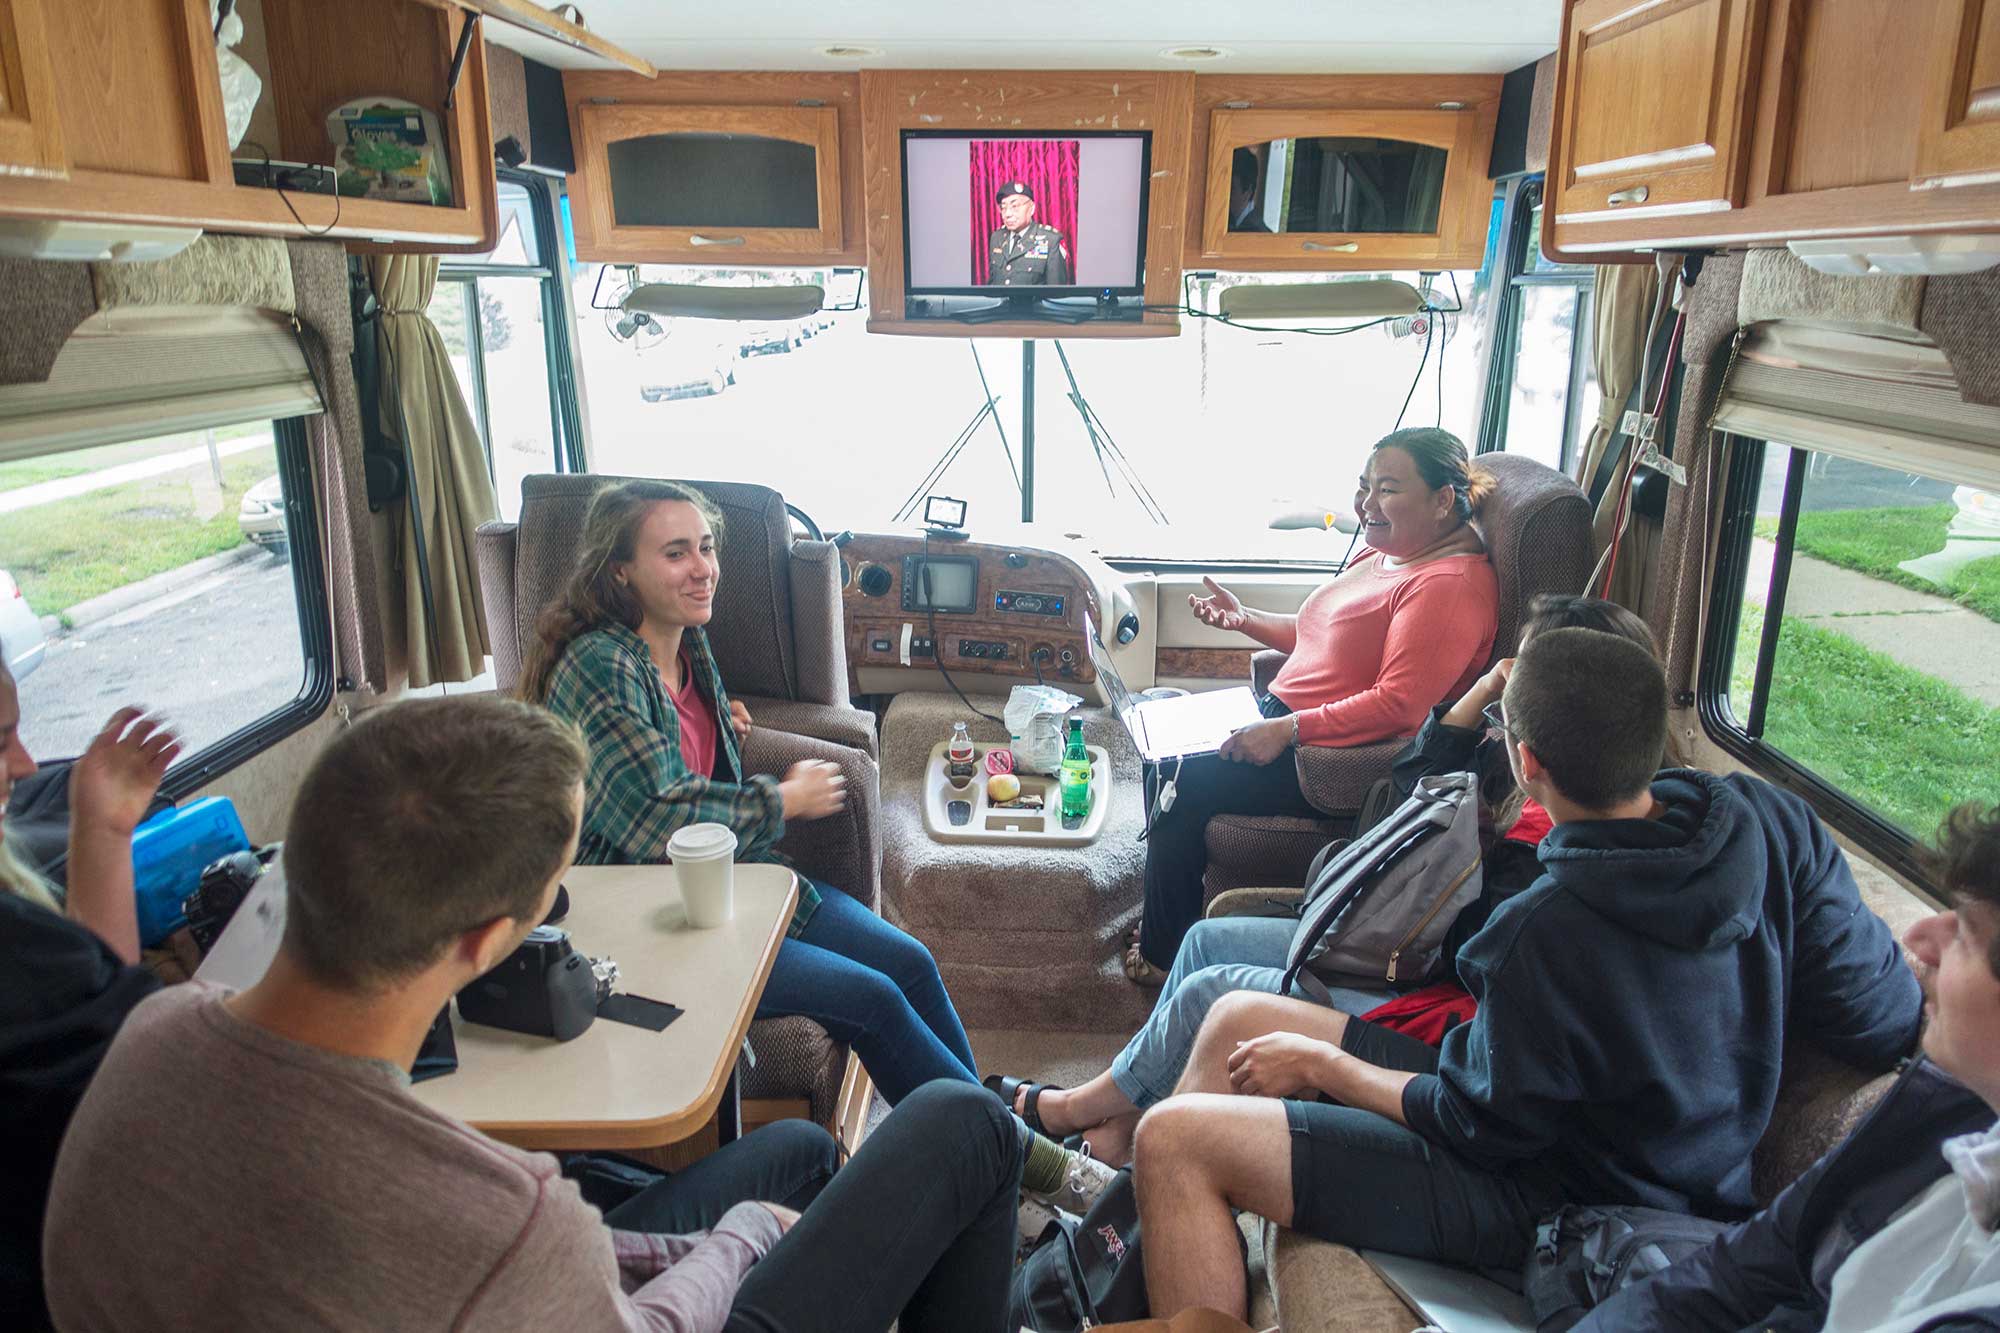 Guest artist Pao Houa Her gives a slideshow of her photographs in the passenger seat of the Winnebago.